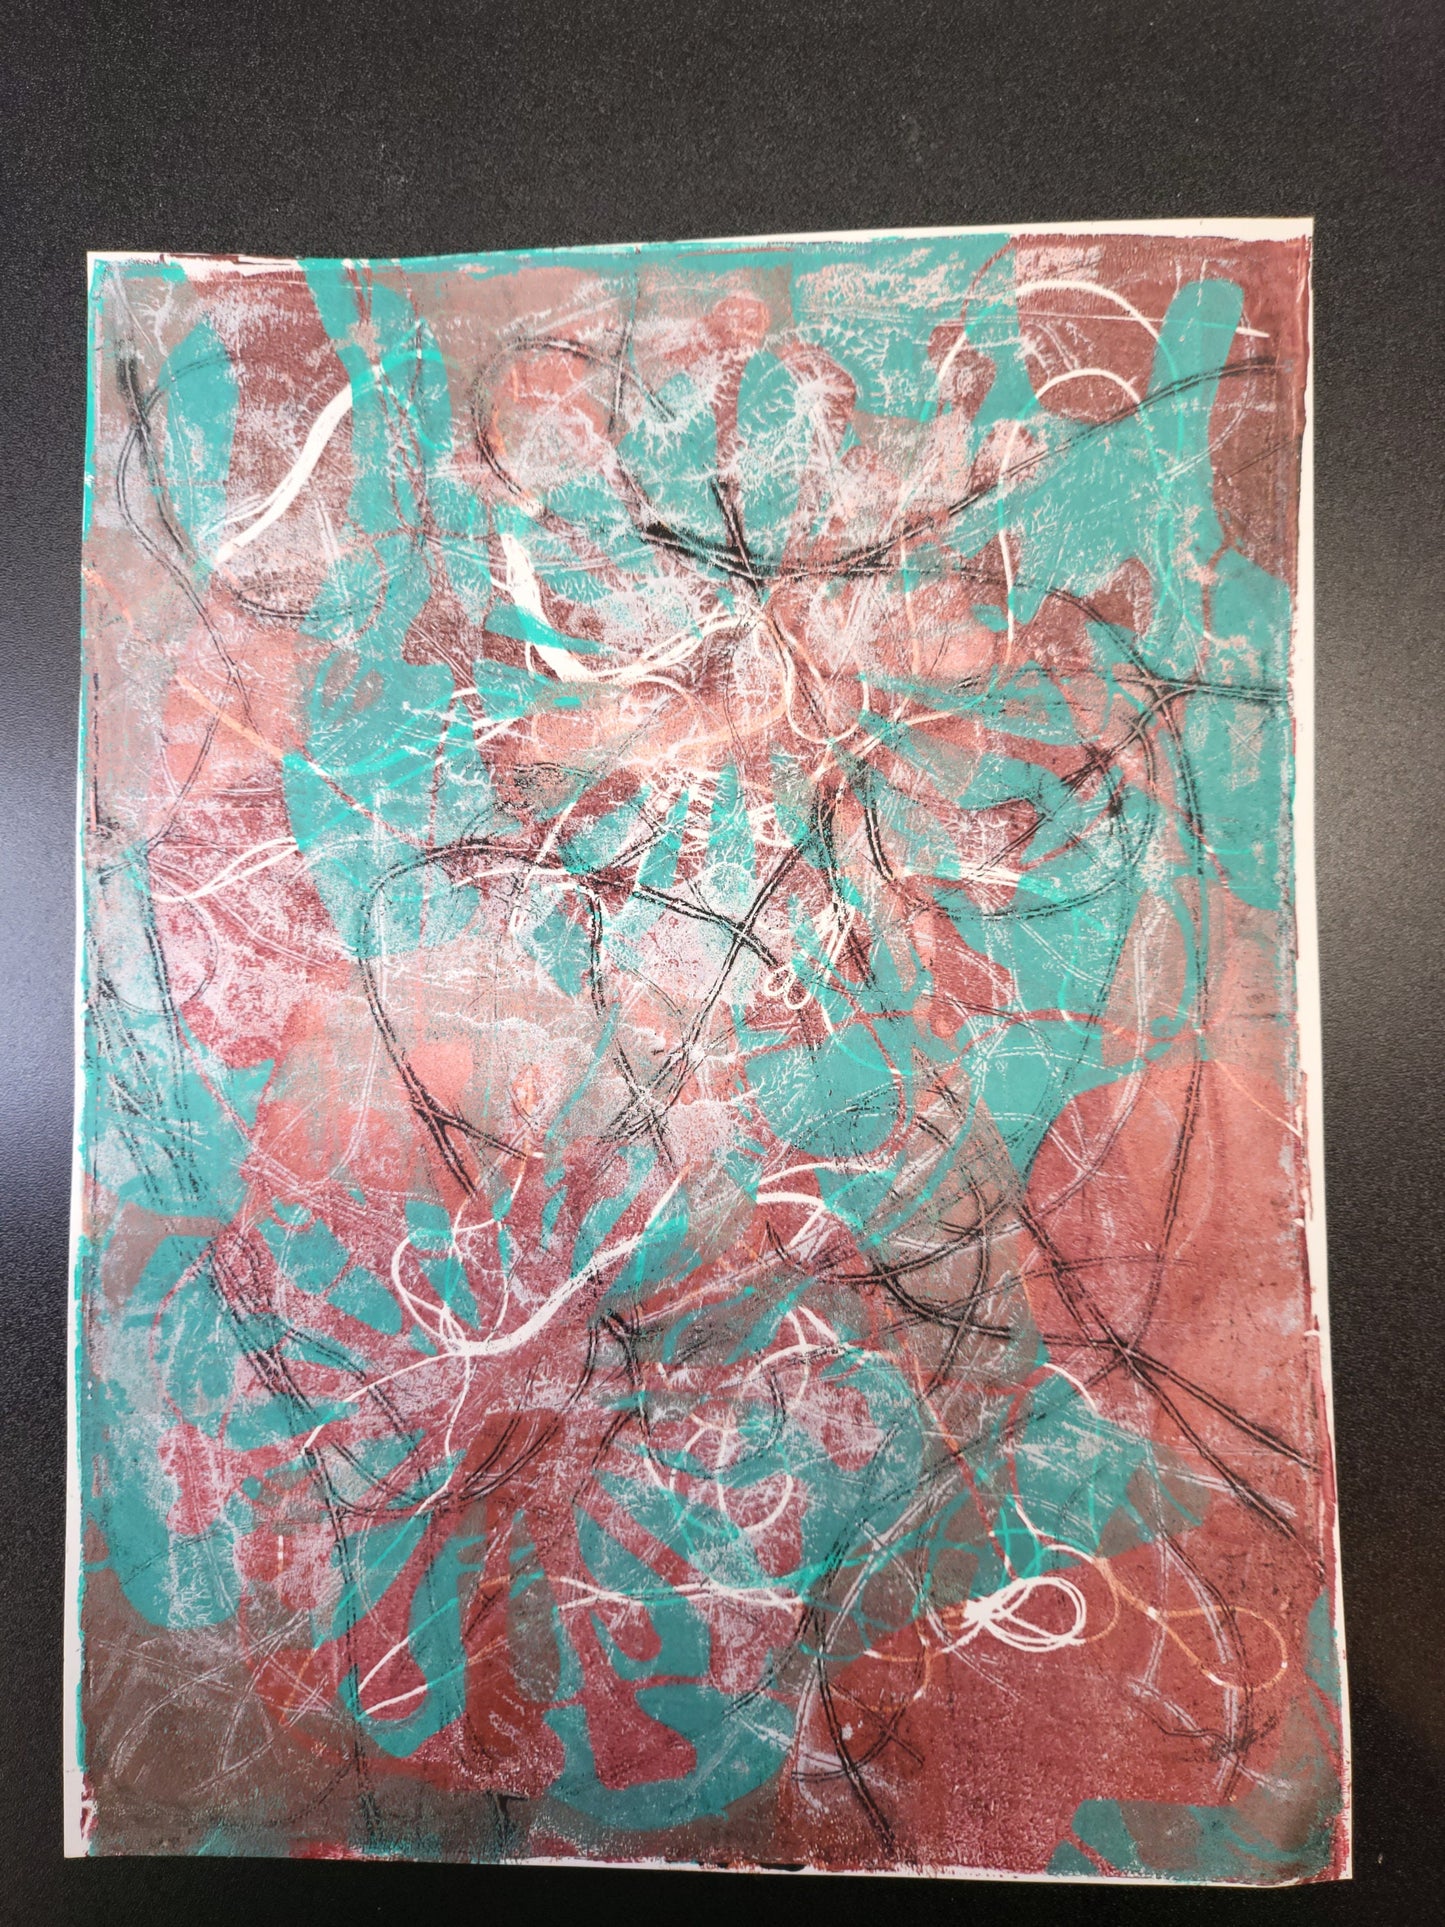 Copper, Teal, White String 8.5x11